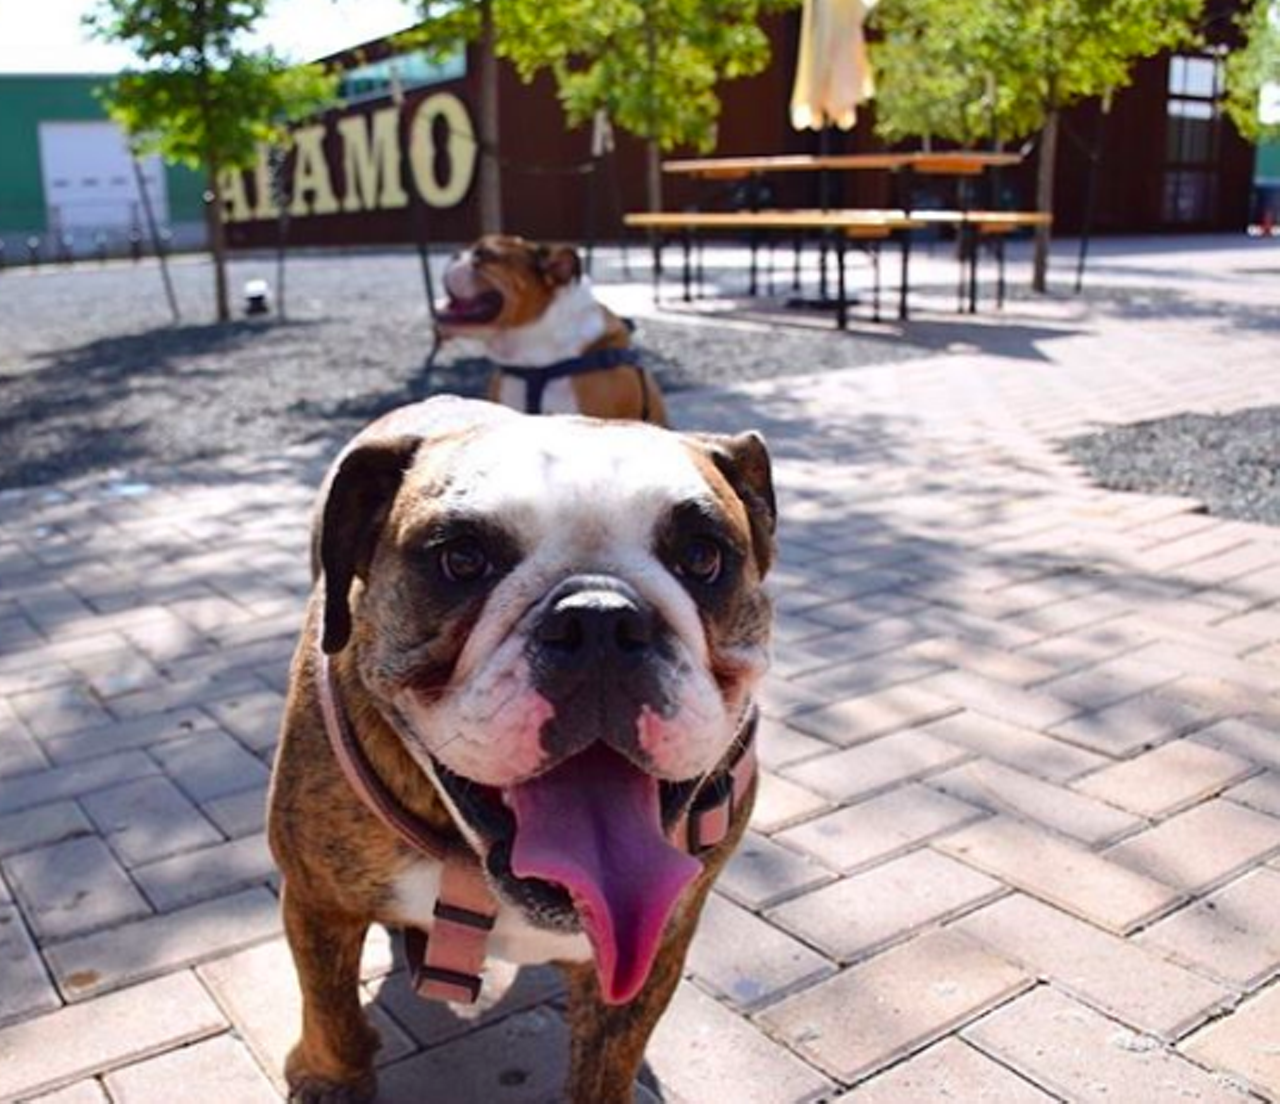 Alamo Beer Company
Masks Required
202 Lamar, (210) 872-5589, alamobeer.com
Consider Alamo Beer’s outdoor space free rein for you and your pup. Complete with picnic tables and cornhole, you’ll have endless fun running around with your furry friend – at least as long as you know your limits..
Photo via Instagram / alamobeerco